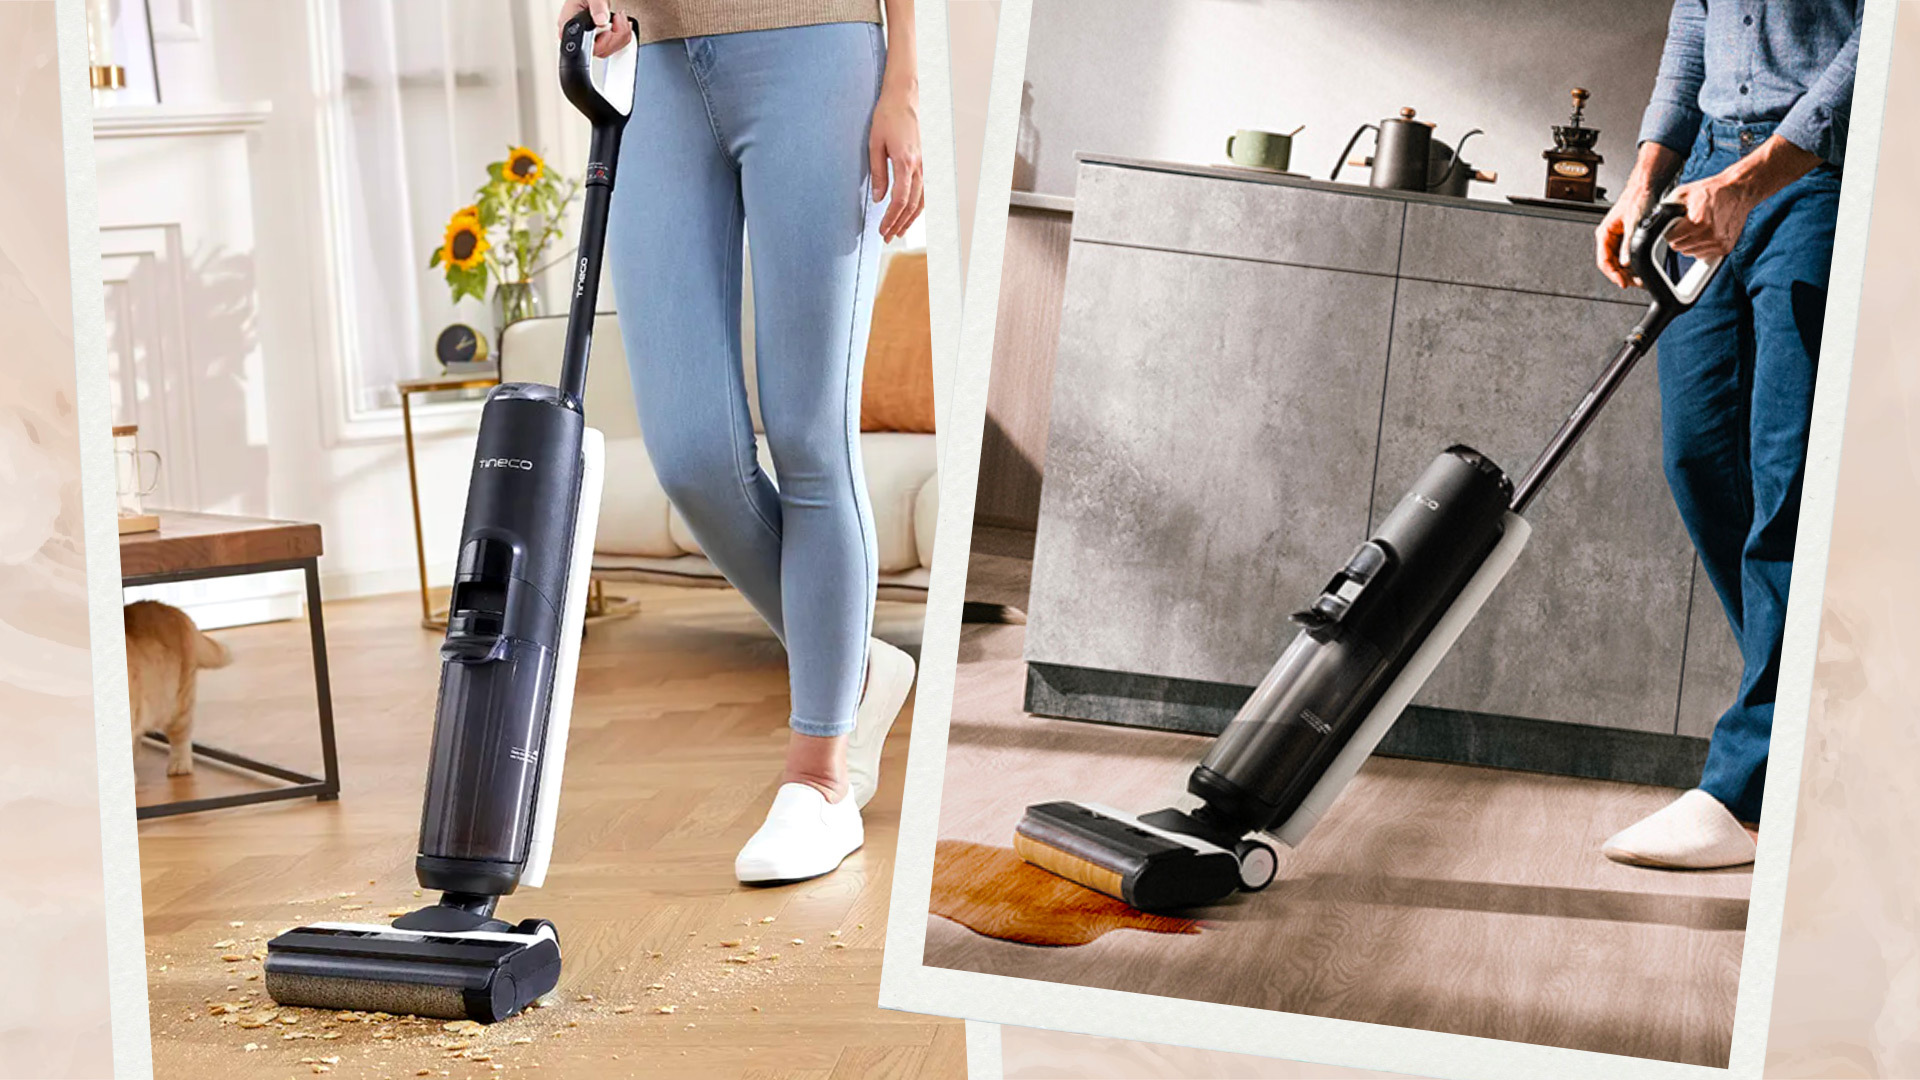 https://www.madmoizelle.com/wp-content/uploads/2023/03/aspirateur-tineco-floor-one-s5.jpg